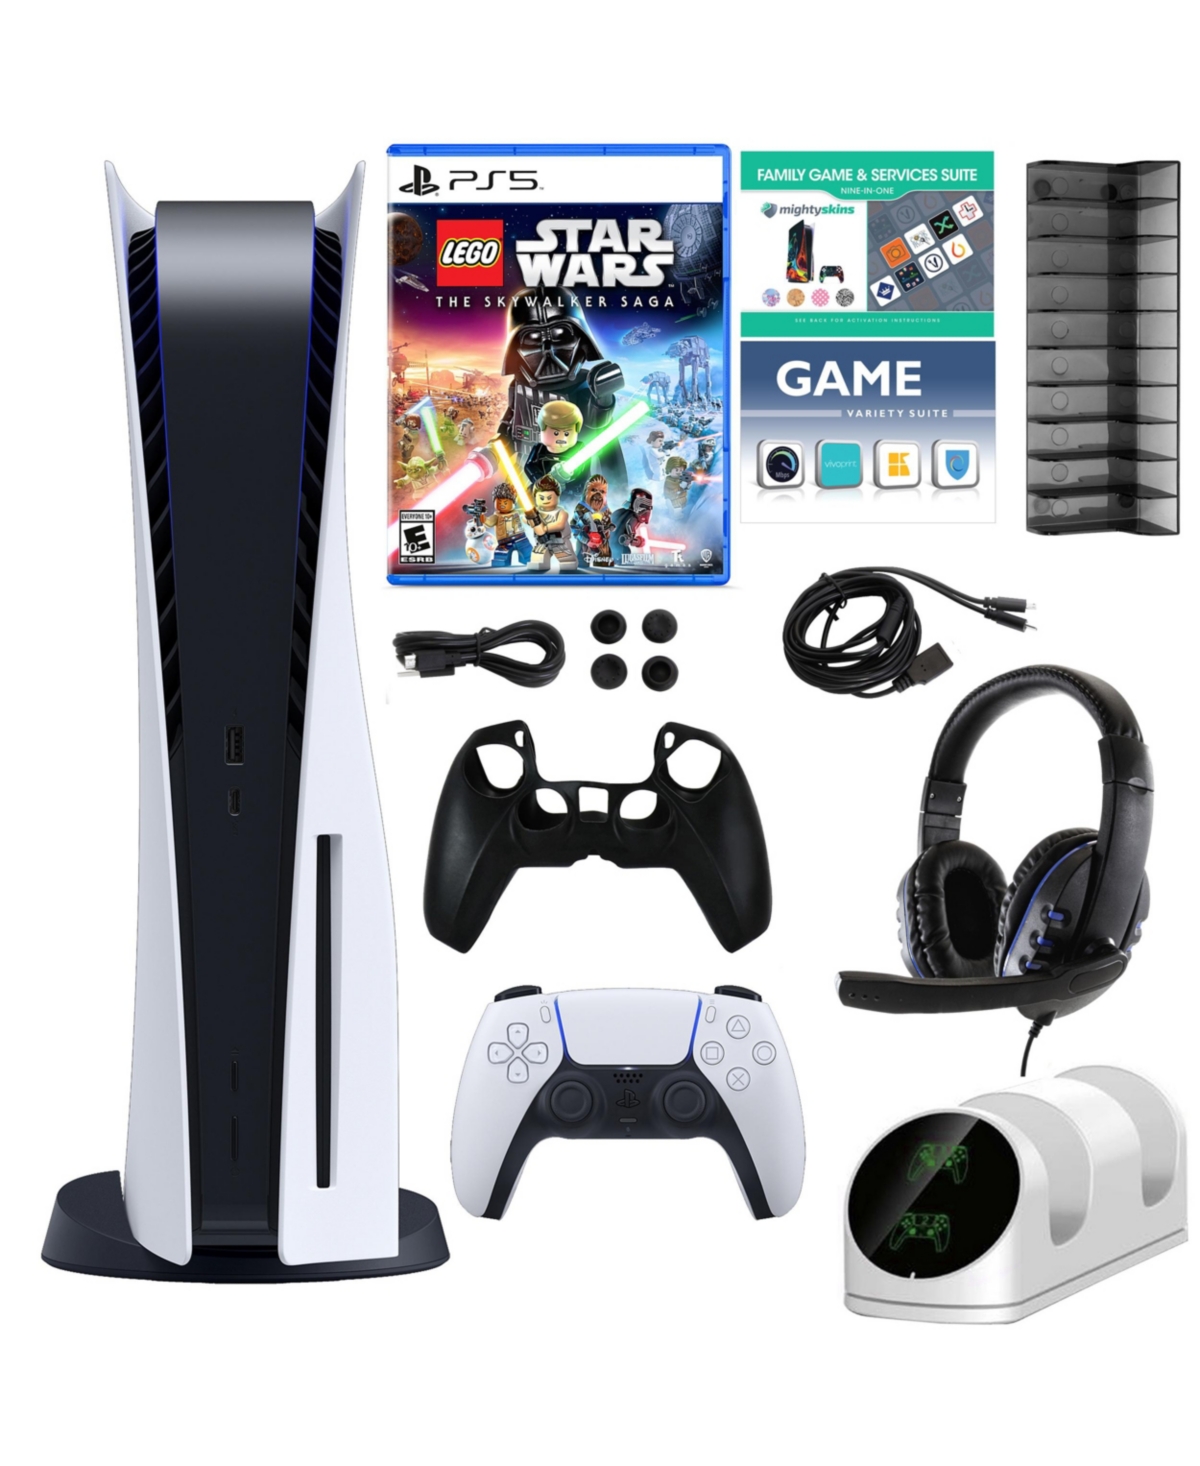 PlayStation 5 Console with Lego Star Wars Skywalker Game, Accessories and 2 Vouchers